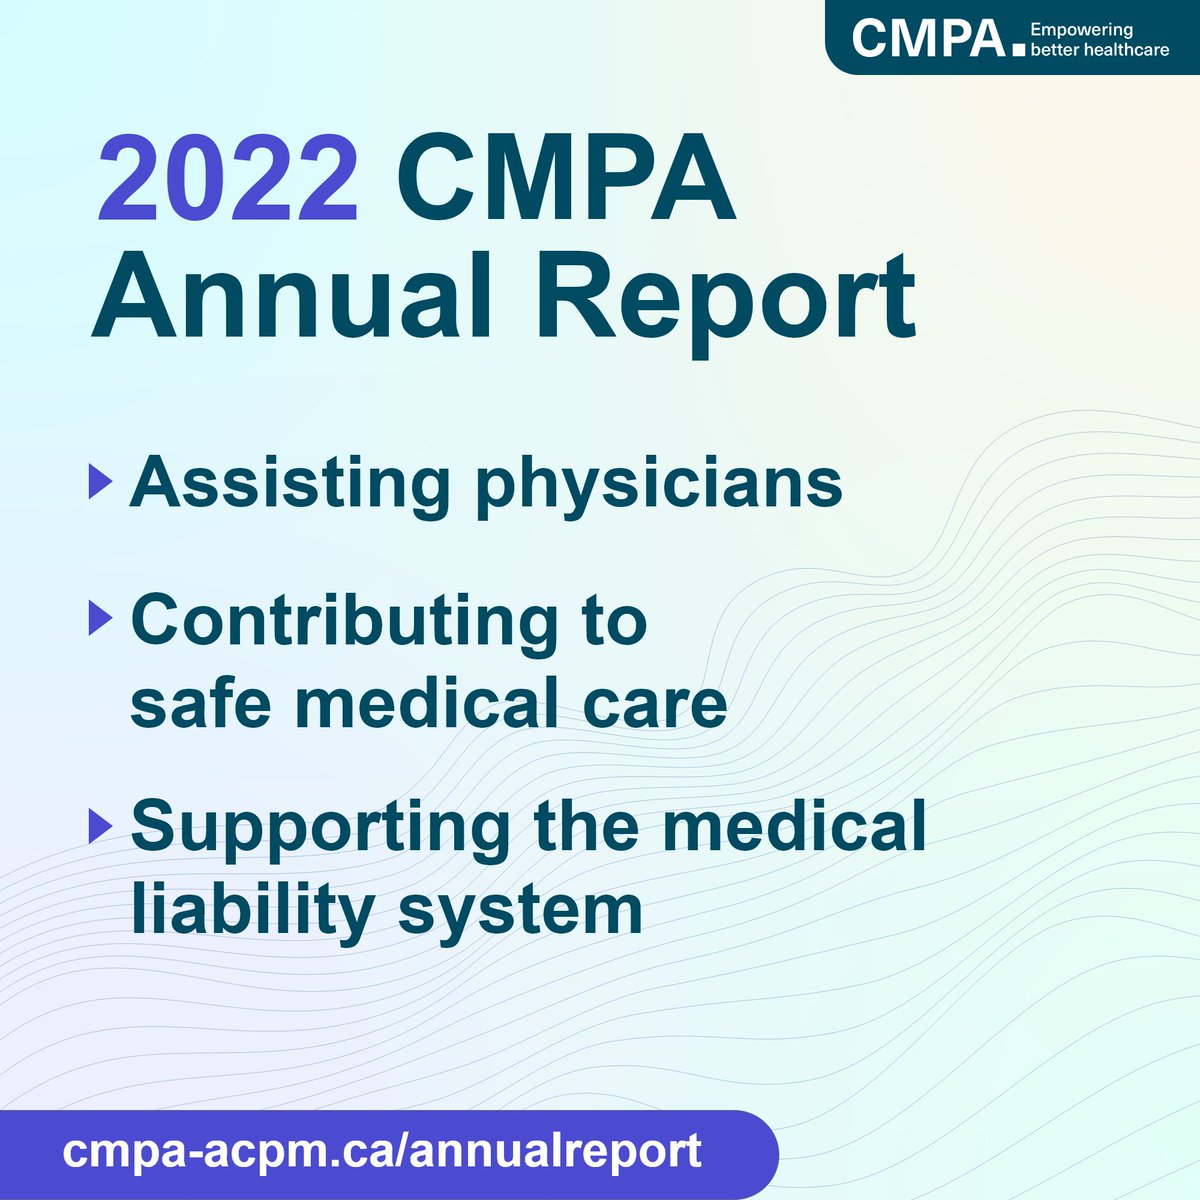 Last year, CMPA engaged with our physician members over 49,000 times! That’s just one of the many ways we supported MDs, patients & the healthcare system in 2022. Read our 2022 @CMPAmembers Annual Report: ow.ly/PB3950P7uvf